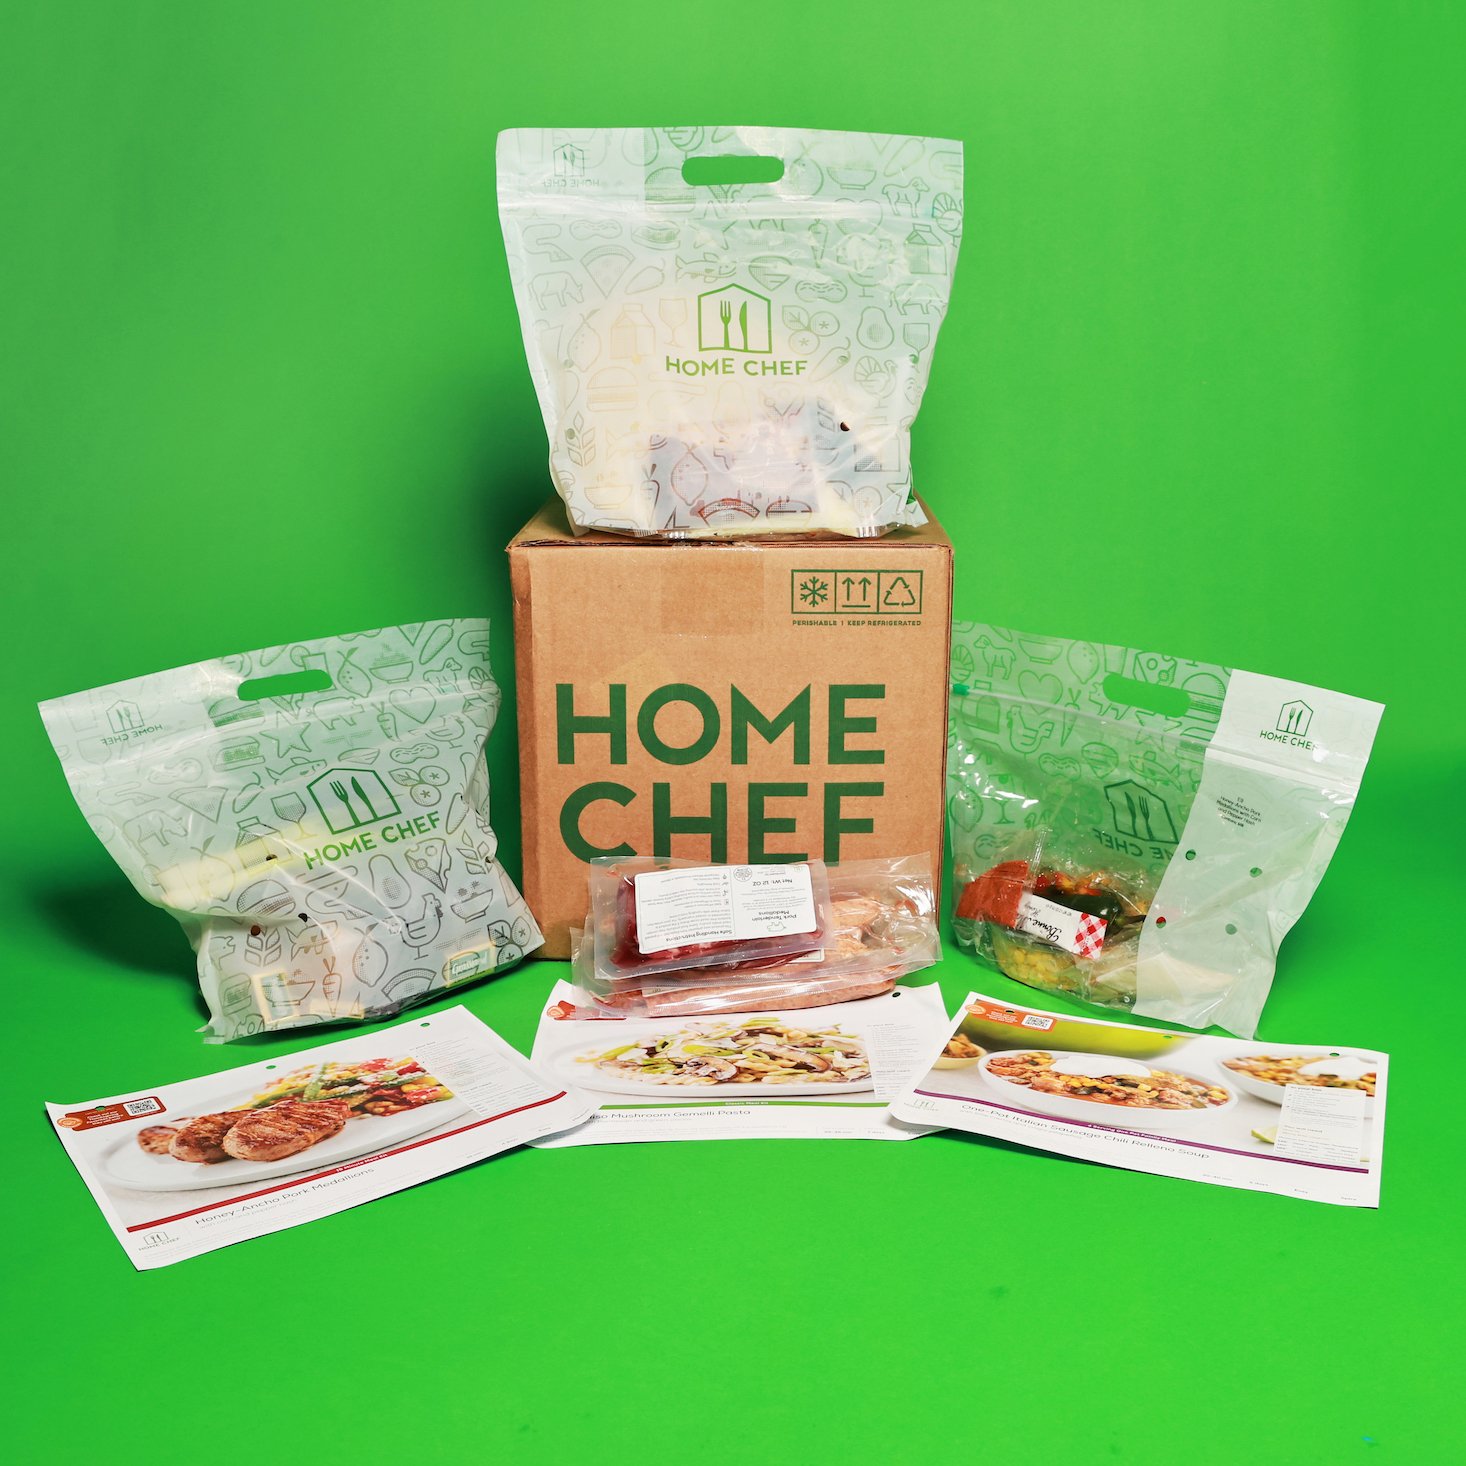 Home Chef Cyber Monday 2021 Sale Extended: Get 12 Free Meals